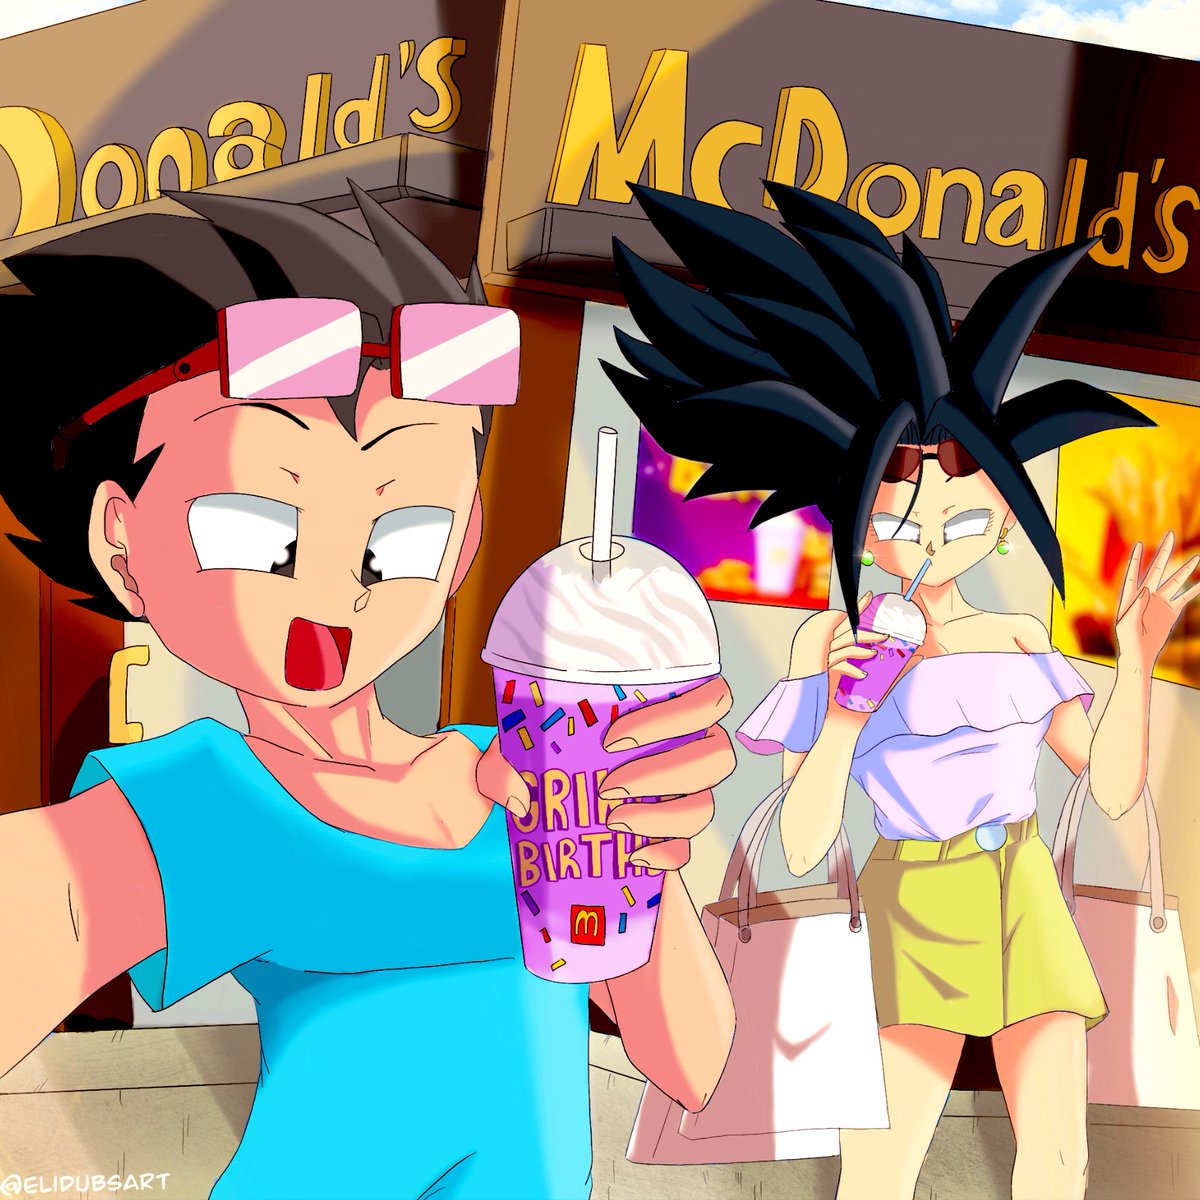 🤗Cabba and Kefla’s first Grimace Shake!🤗 

What could go wrong? 🤷‍♂️ XD

😅🙏 I know I am SUPER late on this, but things got busy, but hey better late than never! XD I hope you all enjoy 😊❤️

#DragonBall #Cabba #Kefla #McDonalds #GrimaceShake #GrimacesBirthday